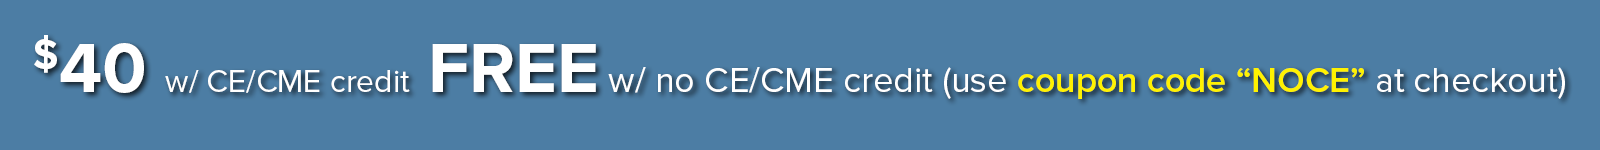 $40 with CE/CME credit; FREE without CE/CME credit (use coupon code "NOCE" at checkout)